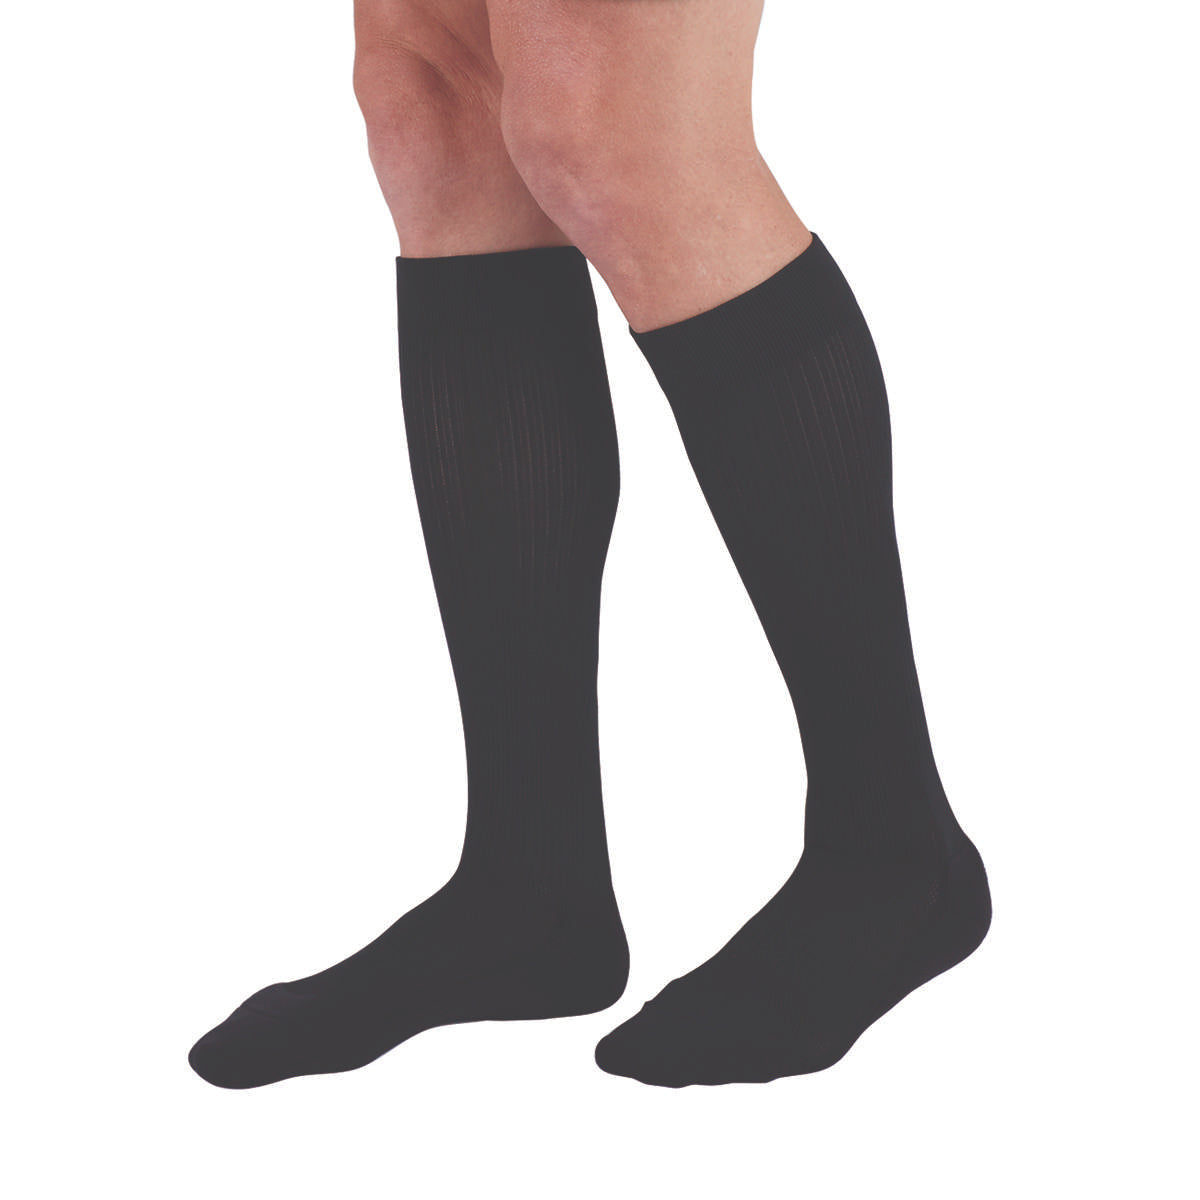 duomed relax 15-20 mmHg Calf High Closed Toe Compression Stockings